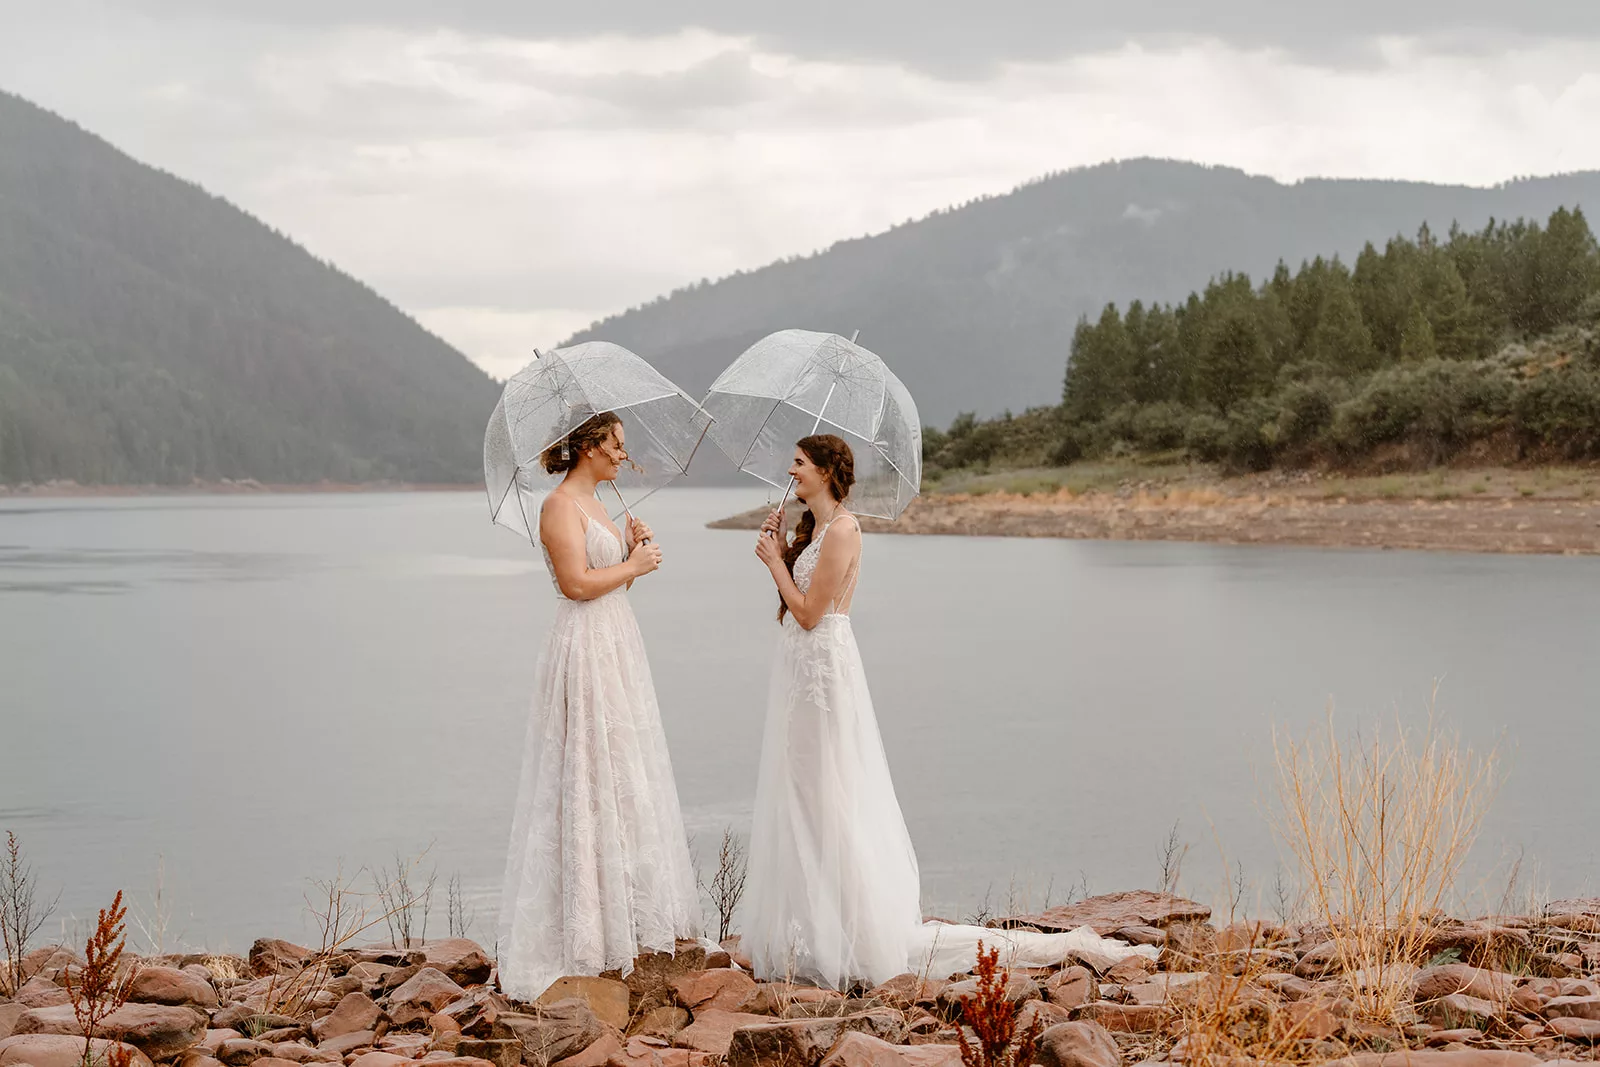 A couple huddles under umbrellas during their elopement day ceremony, proving that you can have fun even when the weather turns.